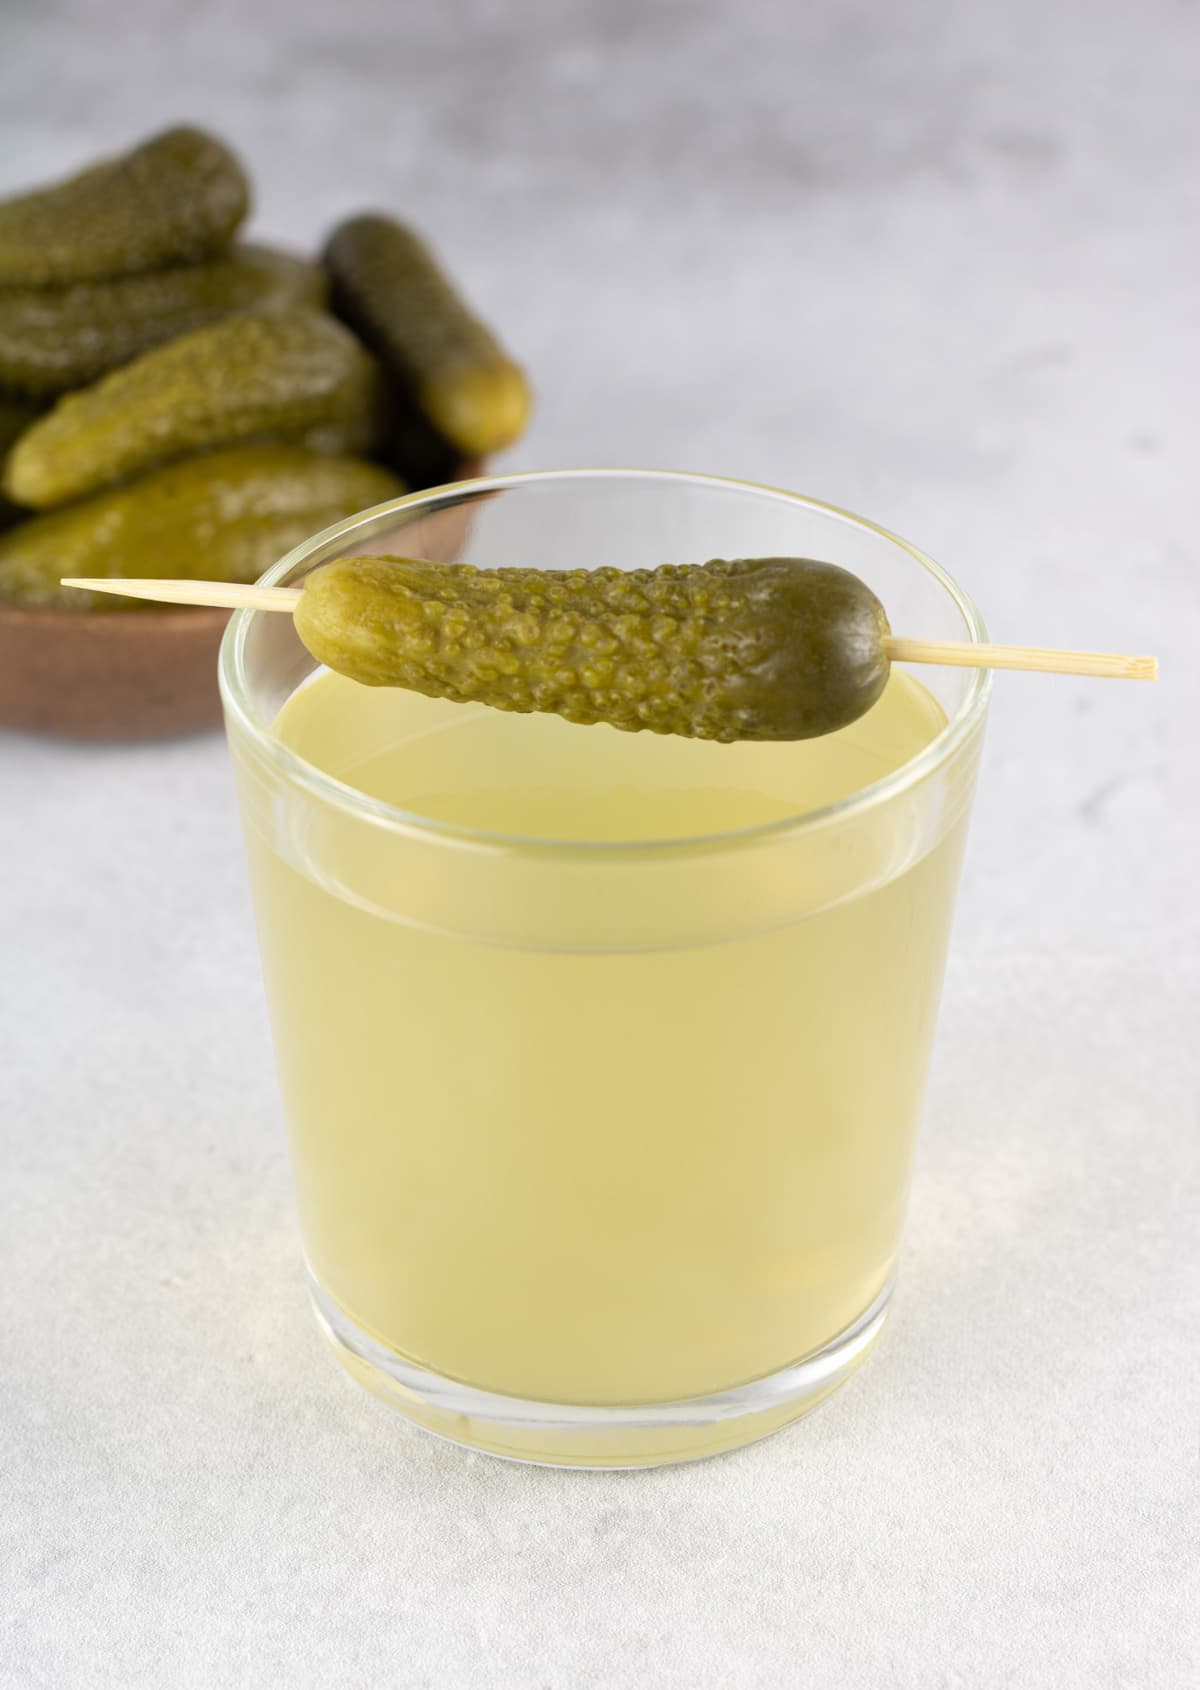 Pickle juice or brine in a glass and jar of pickled cucumbers on a white background. Copy Space.